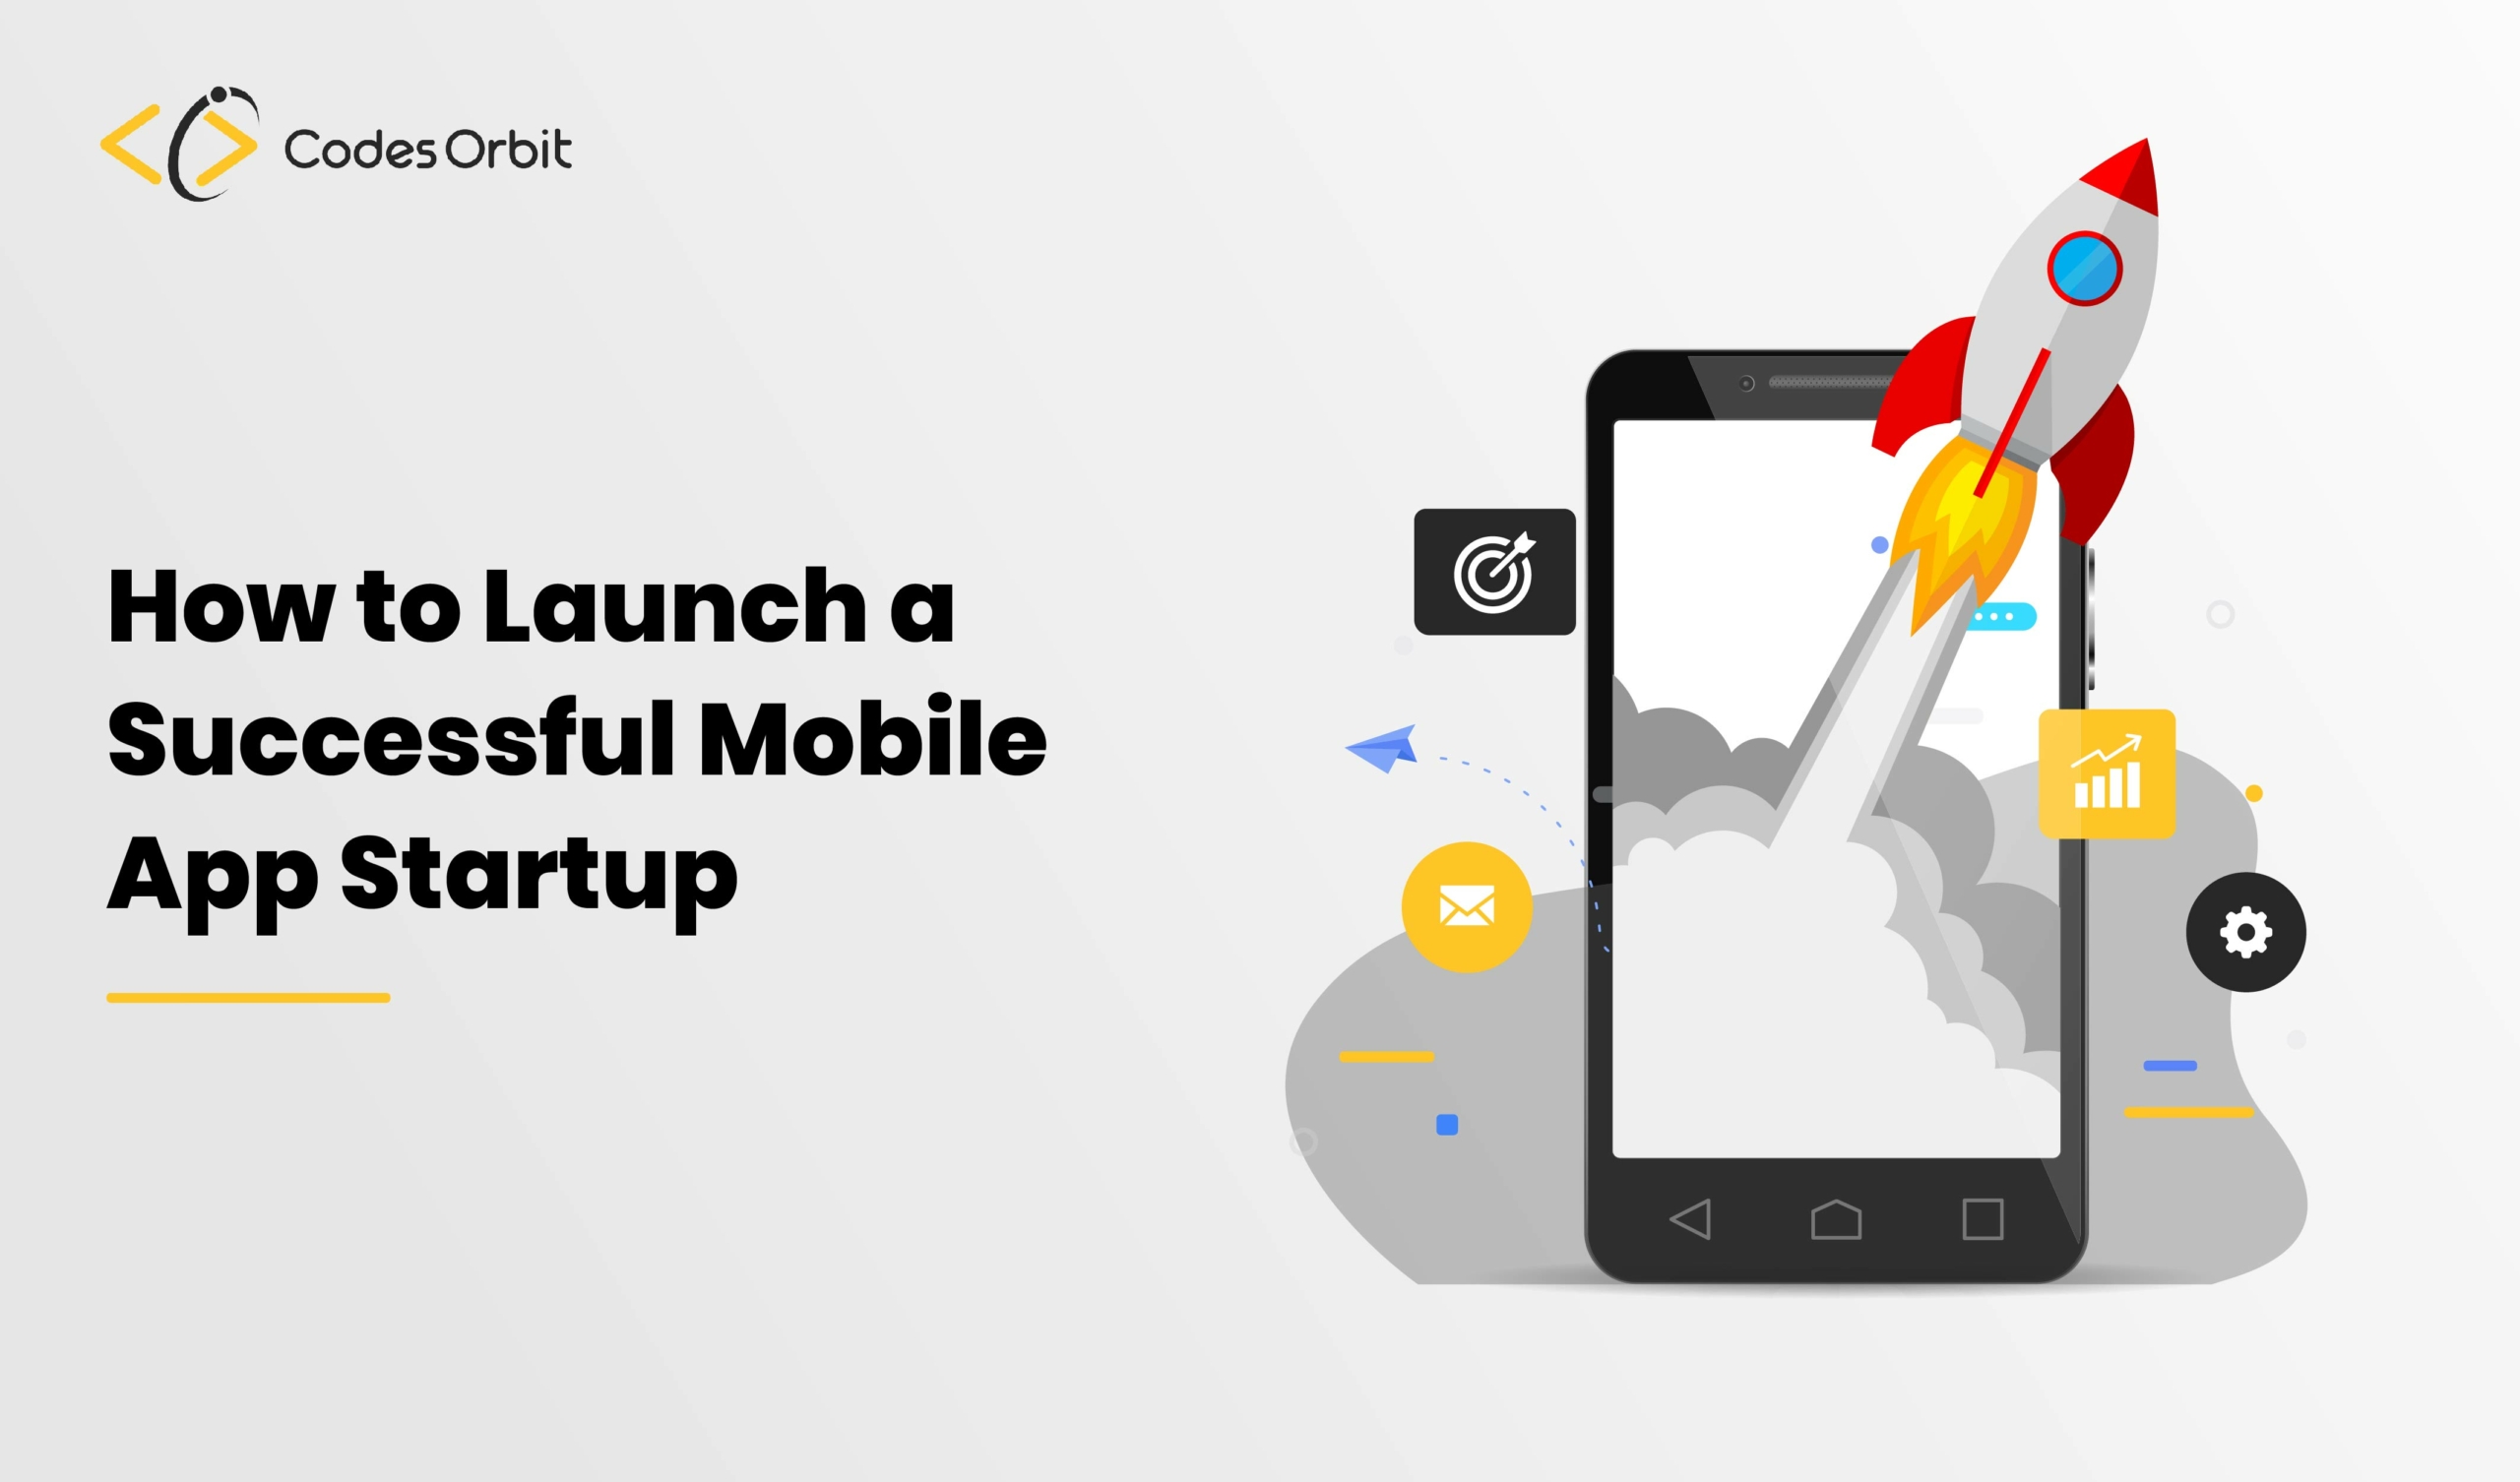 Launch a Successful Mobile App Startup